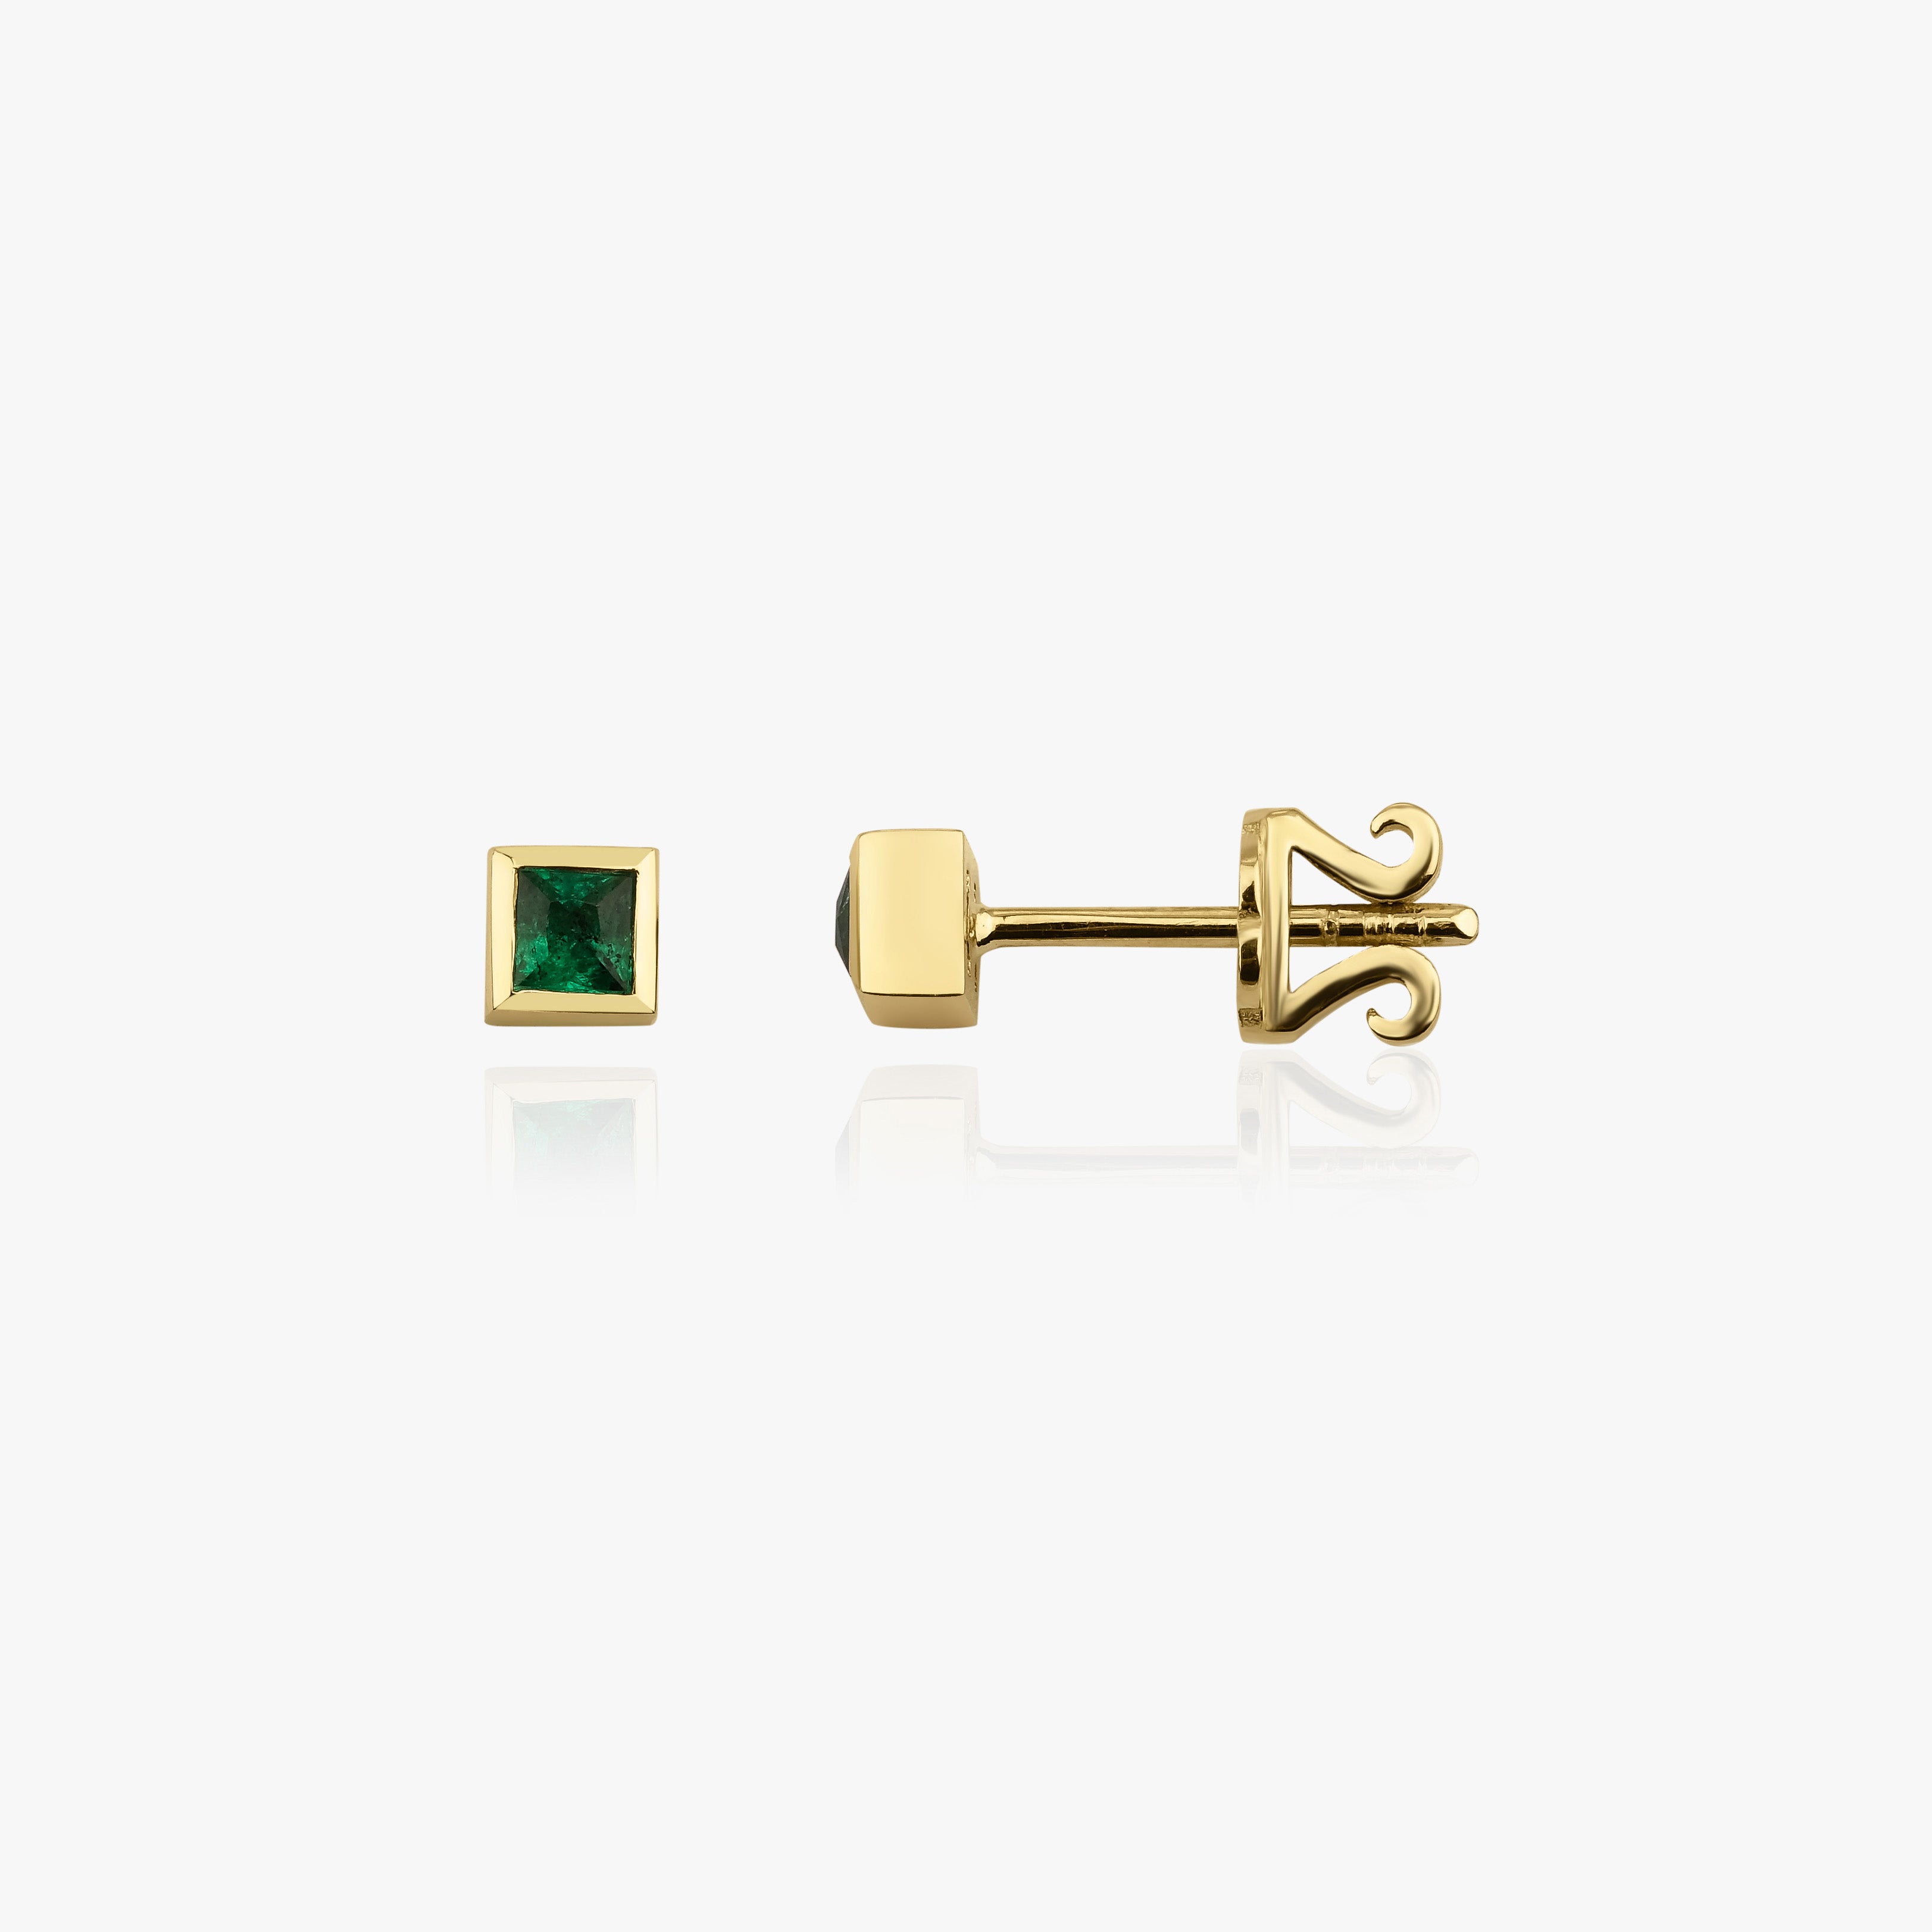 Princess Cut Emerald Studs Available in 14K and 18K Gold